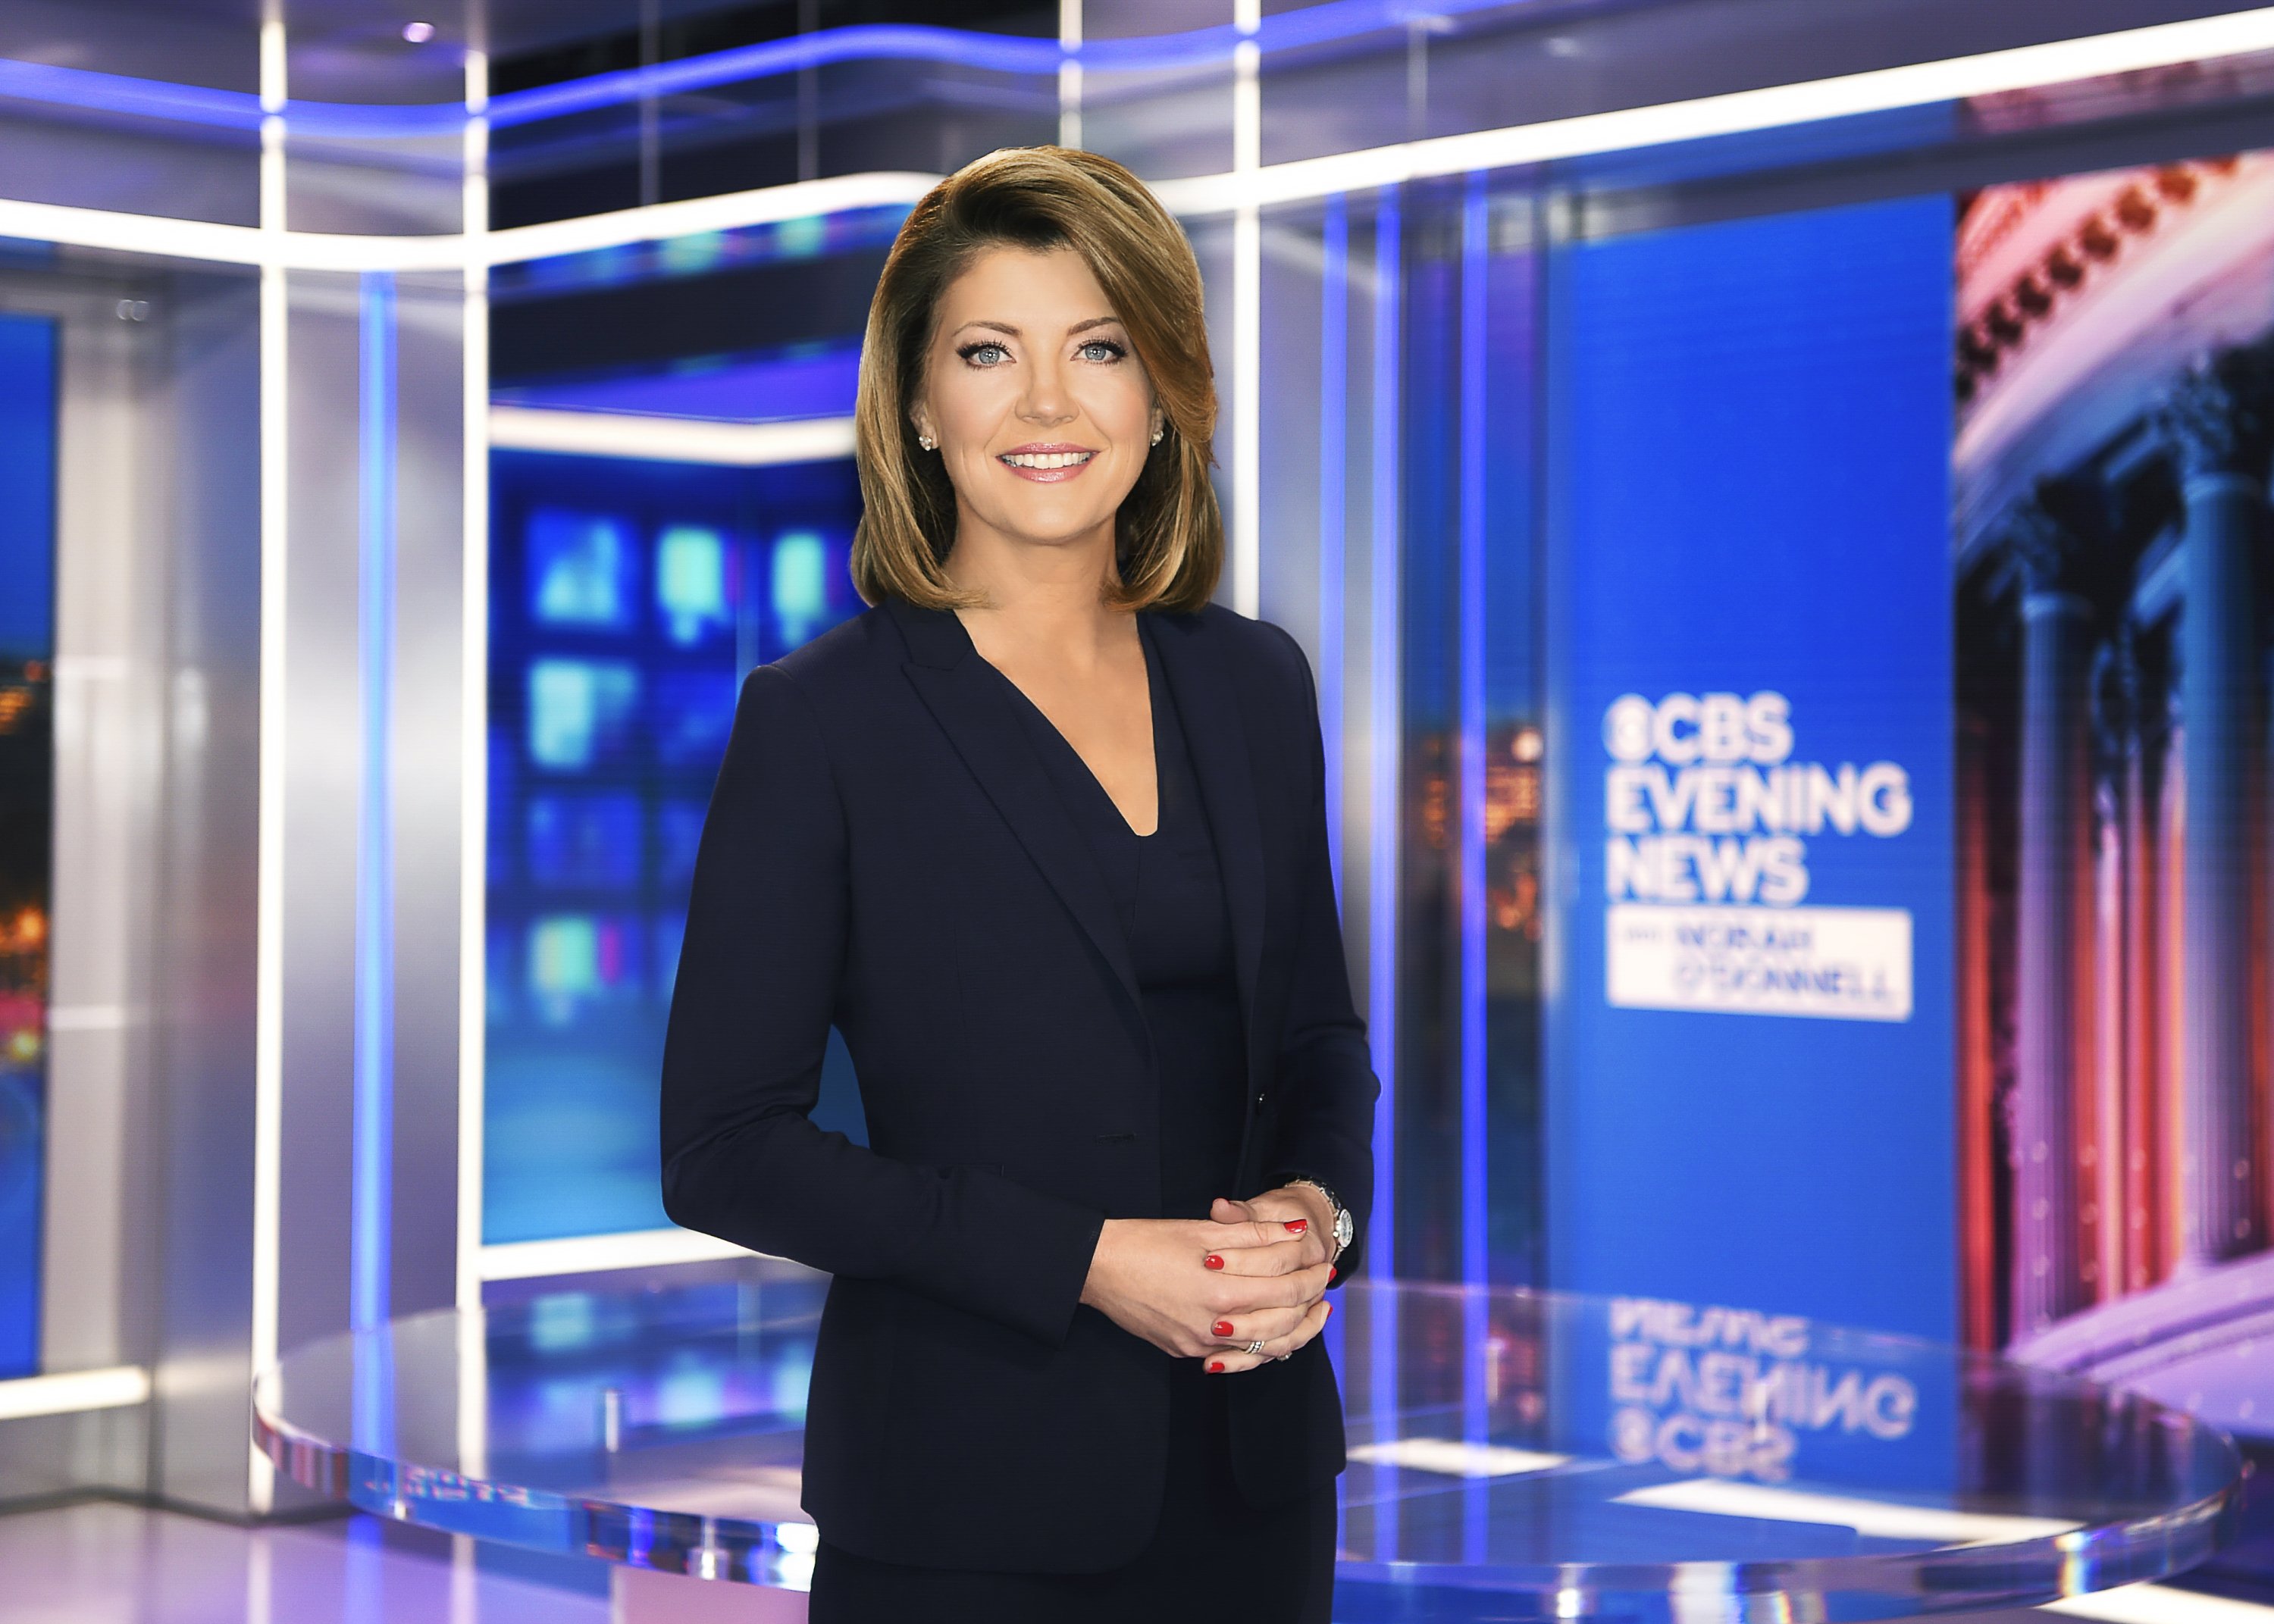 Norah O'Donnell, Anchor and Managing Editor of CBS Evening News with Norah O'Donnell | Photo: Getty Images